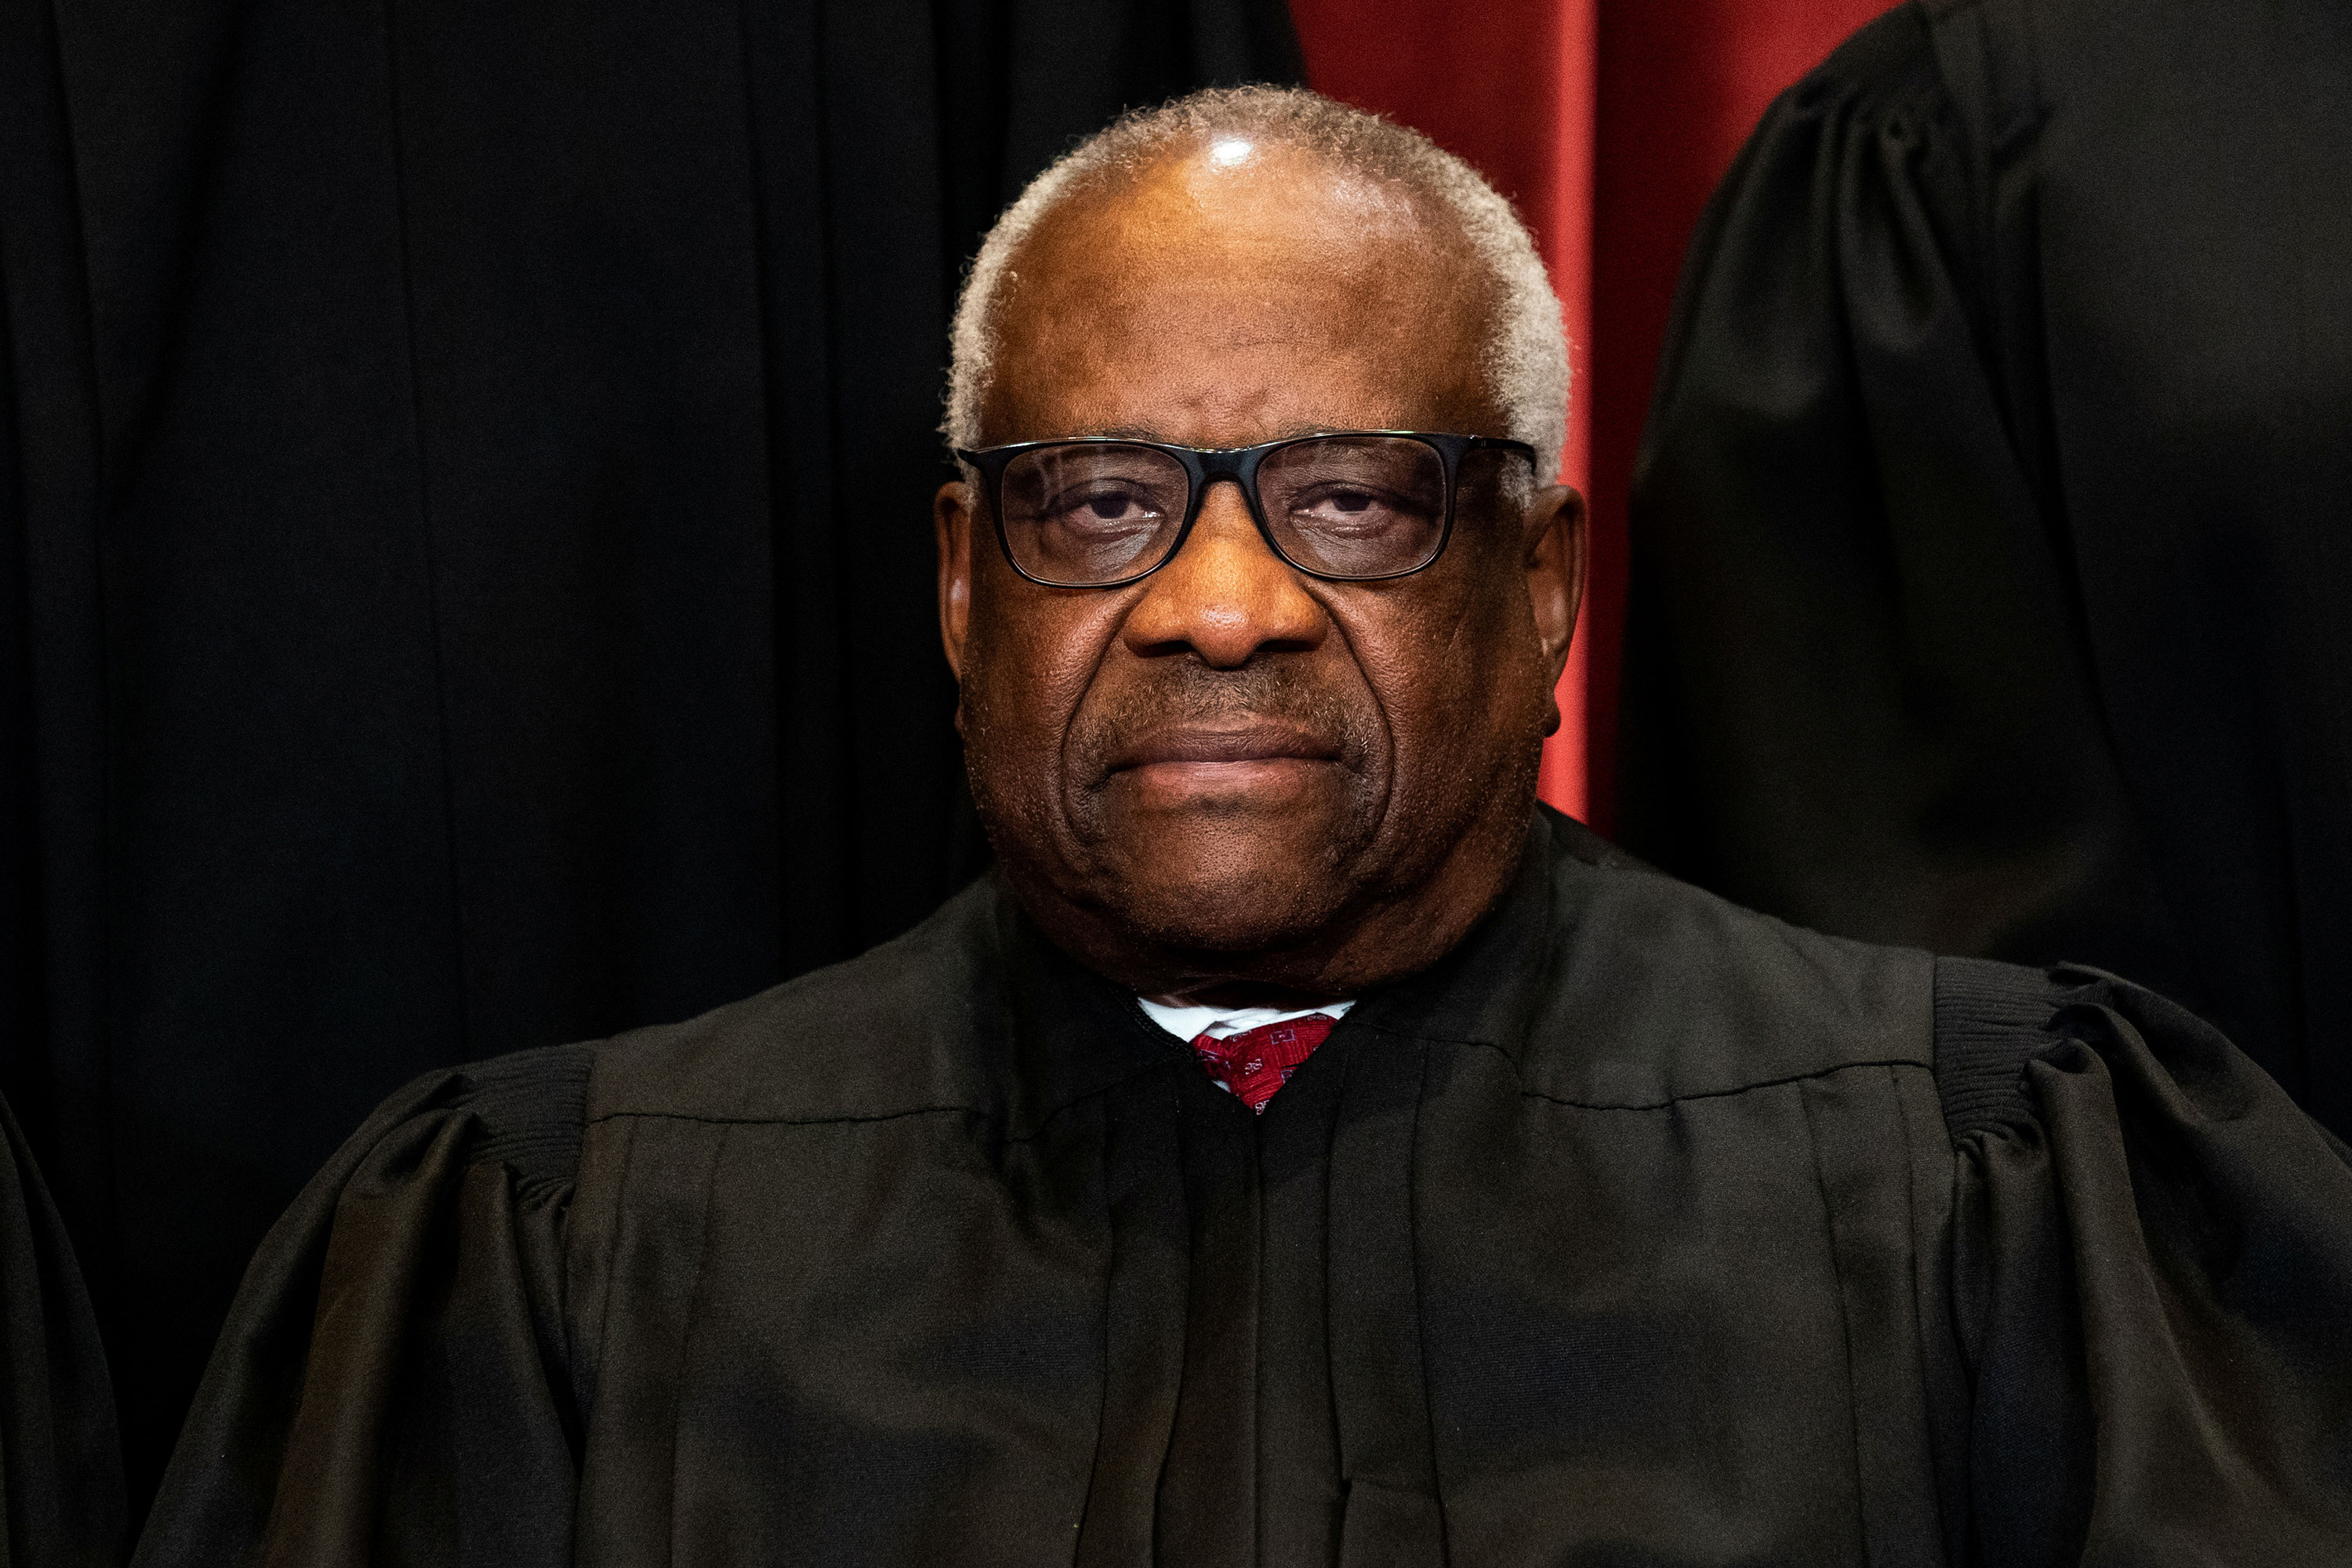 Associate Justice Clarence Thomas poses during a group photo at the Supreme Court in Washington in 2021.